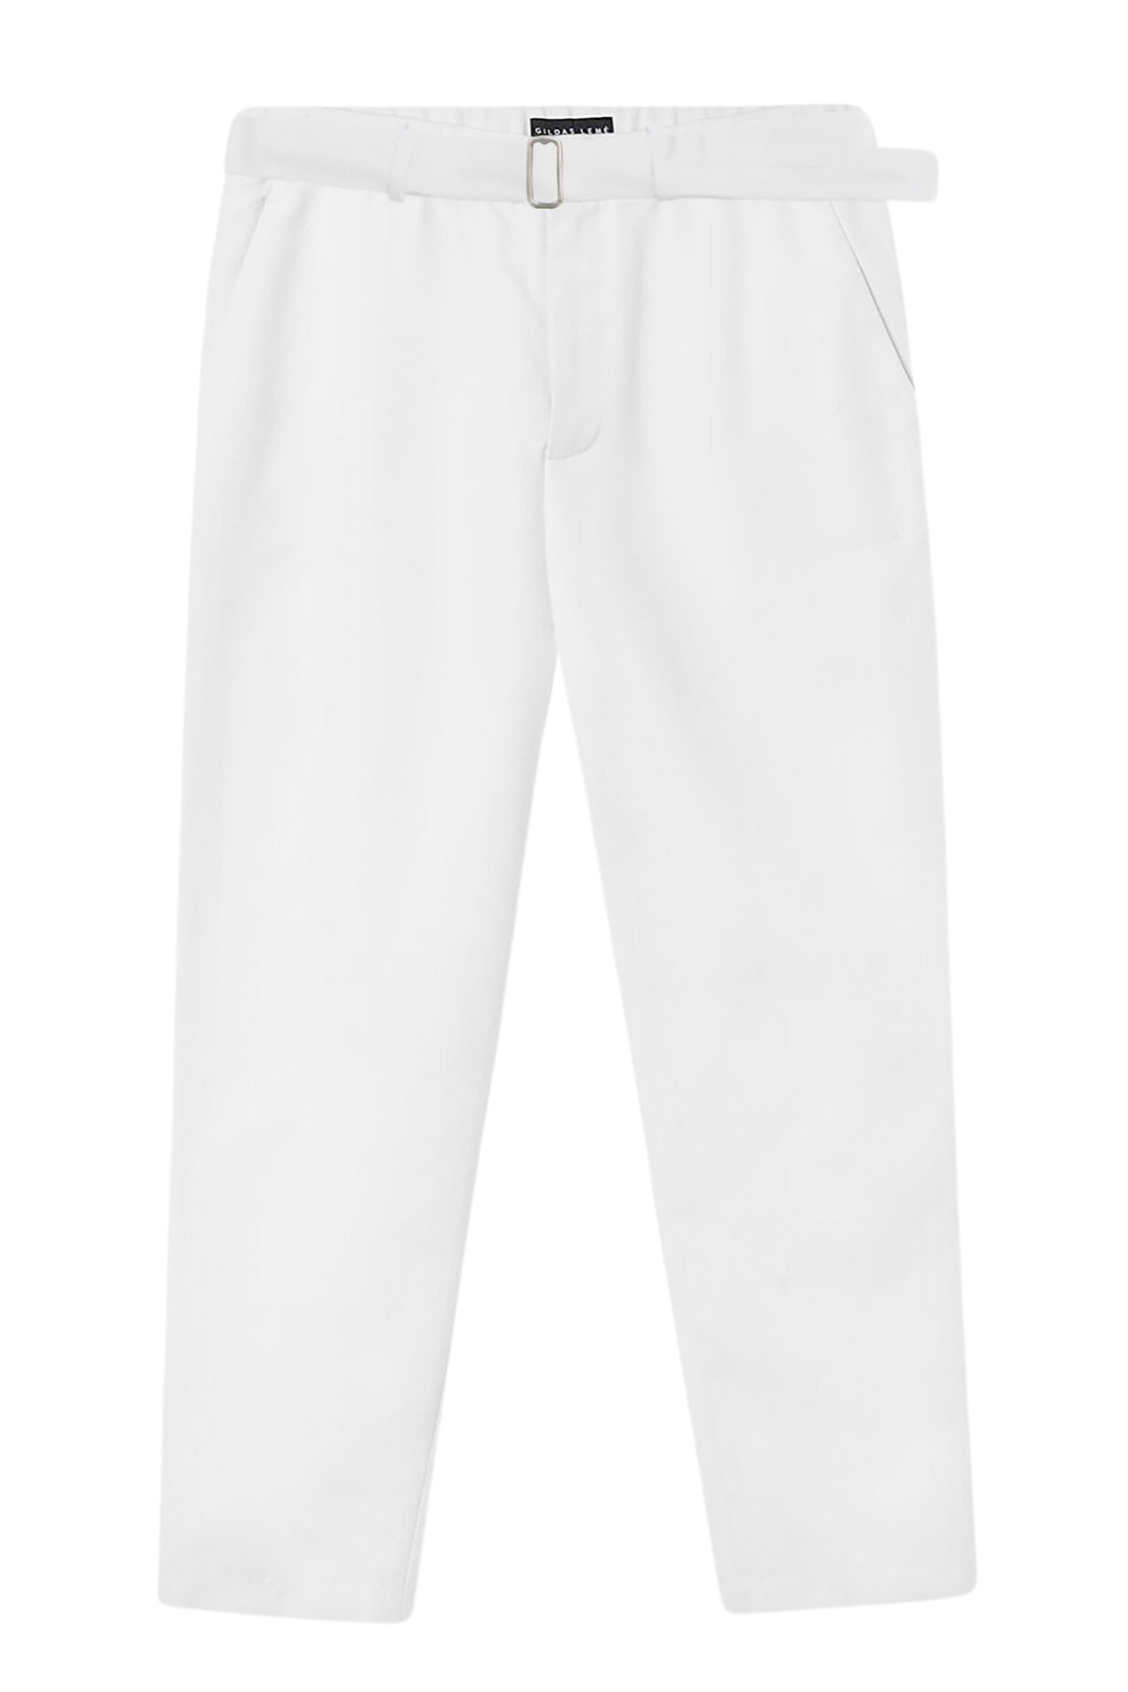 SUMMER ESSENTIAL CHINO REGULAR FIT PANTS WITH BELT LOOPS